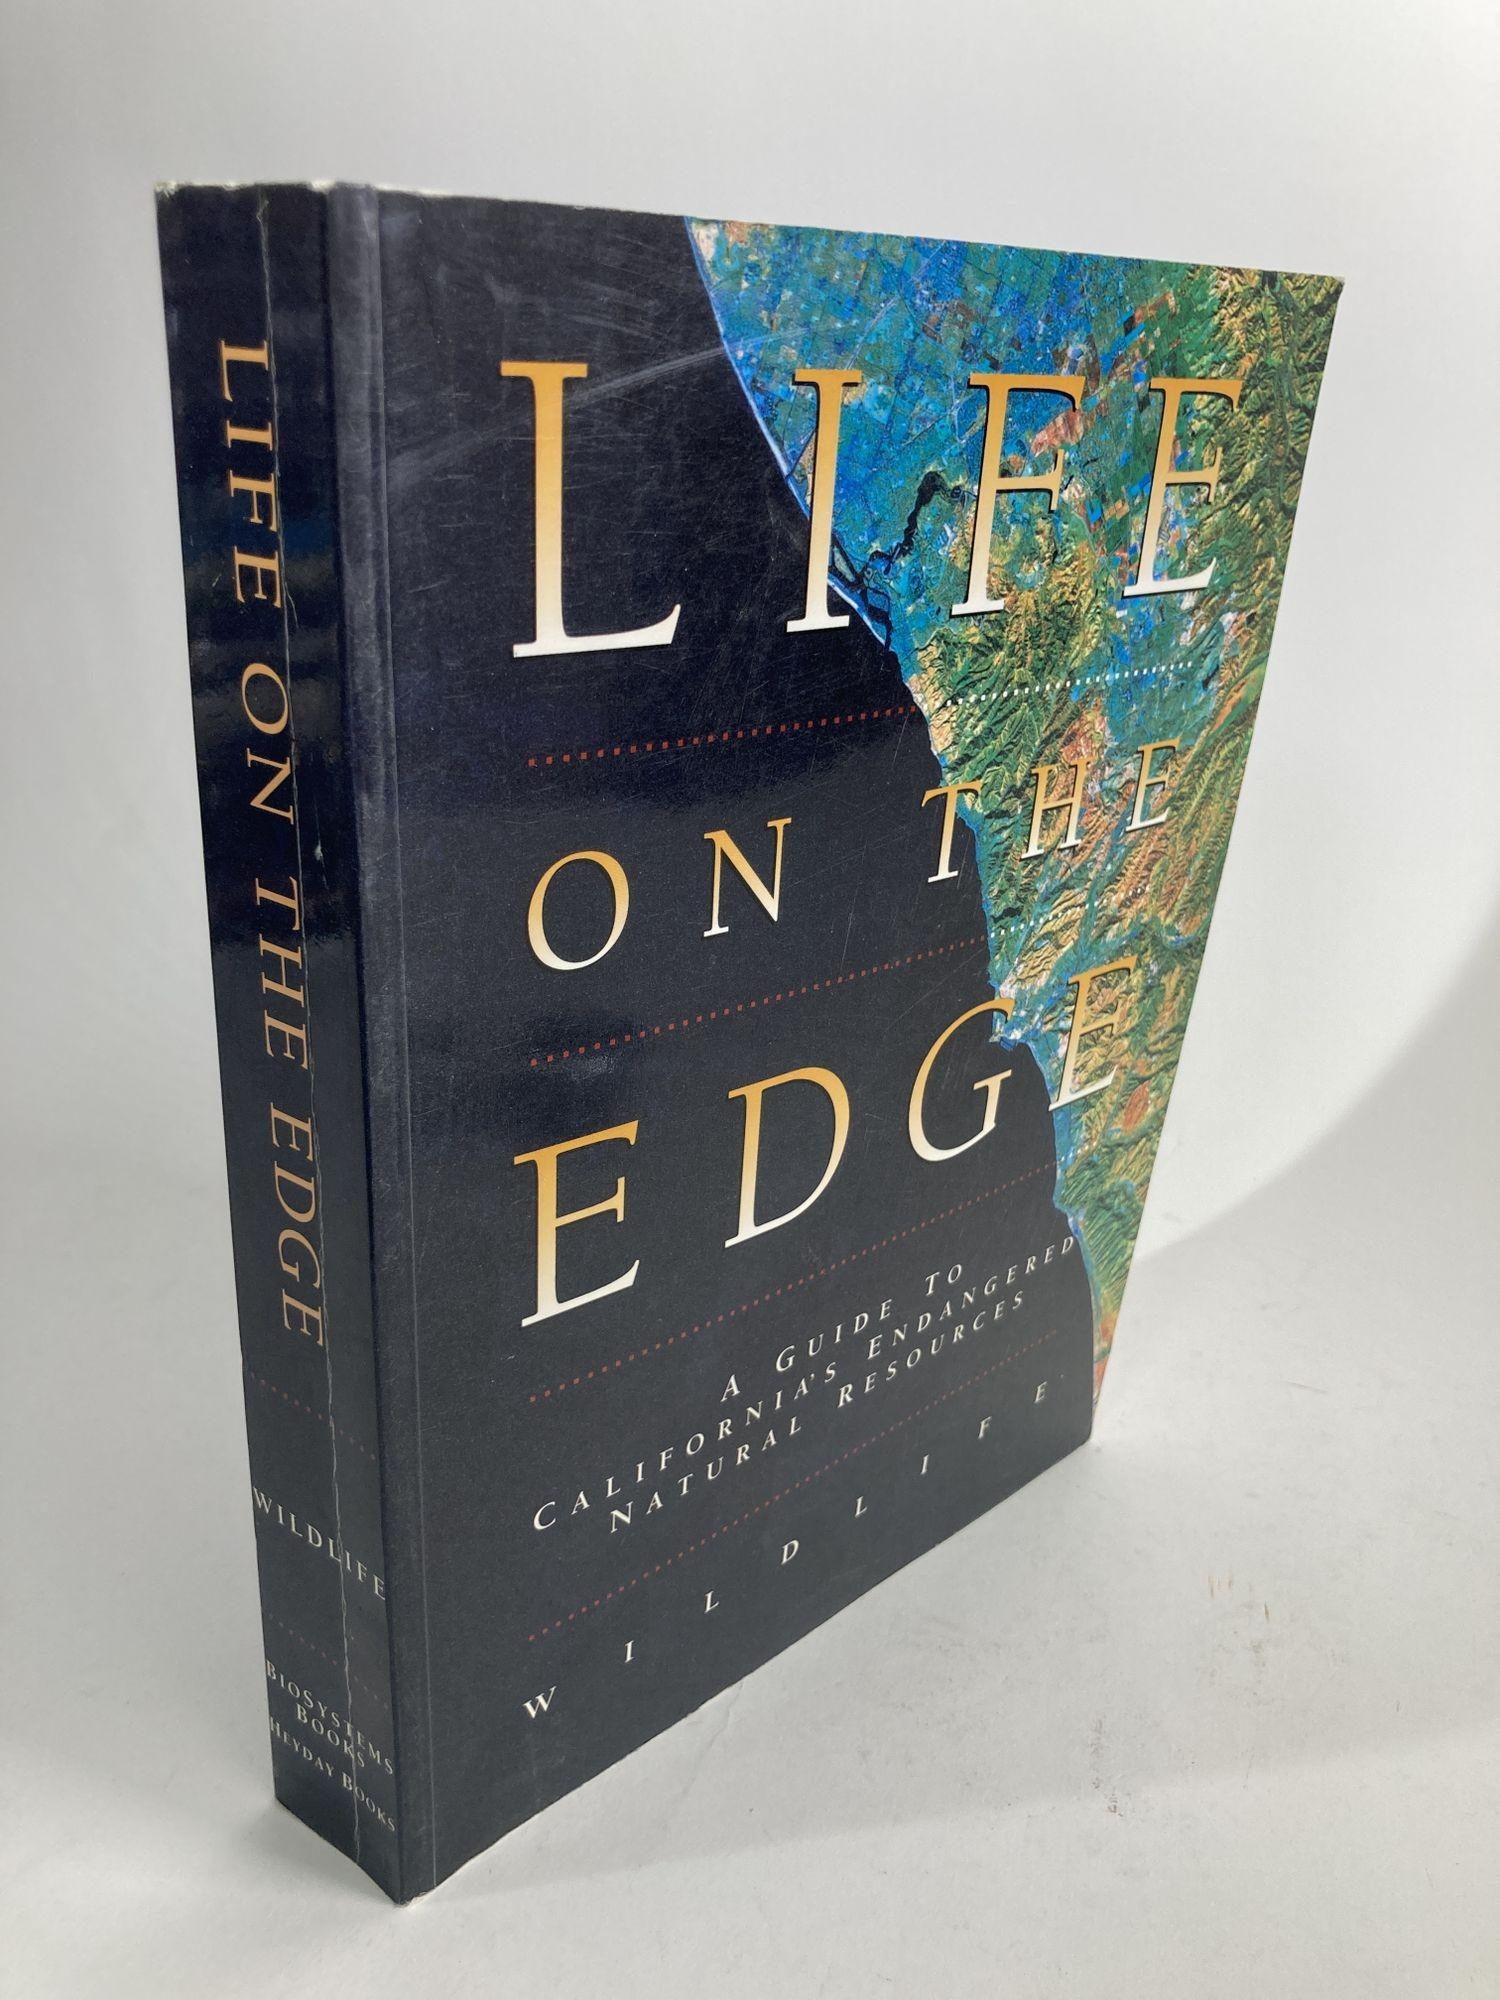 Life on the Edge: A Guide to California's Endangered Natural Resources.
Wildlife Crabtree, Margo.
Title: Life on the Edge:A Guide to California's Endangered Natural Resources.
Publisher: Brand: Heyday Books
Publication Date: 1st edition,